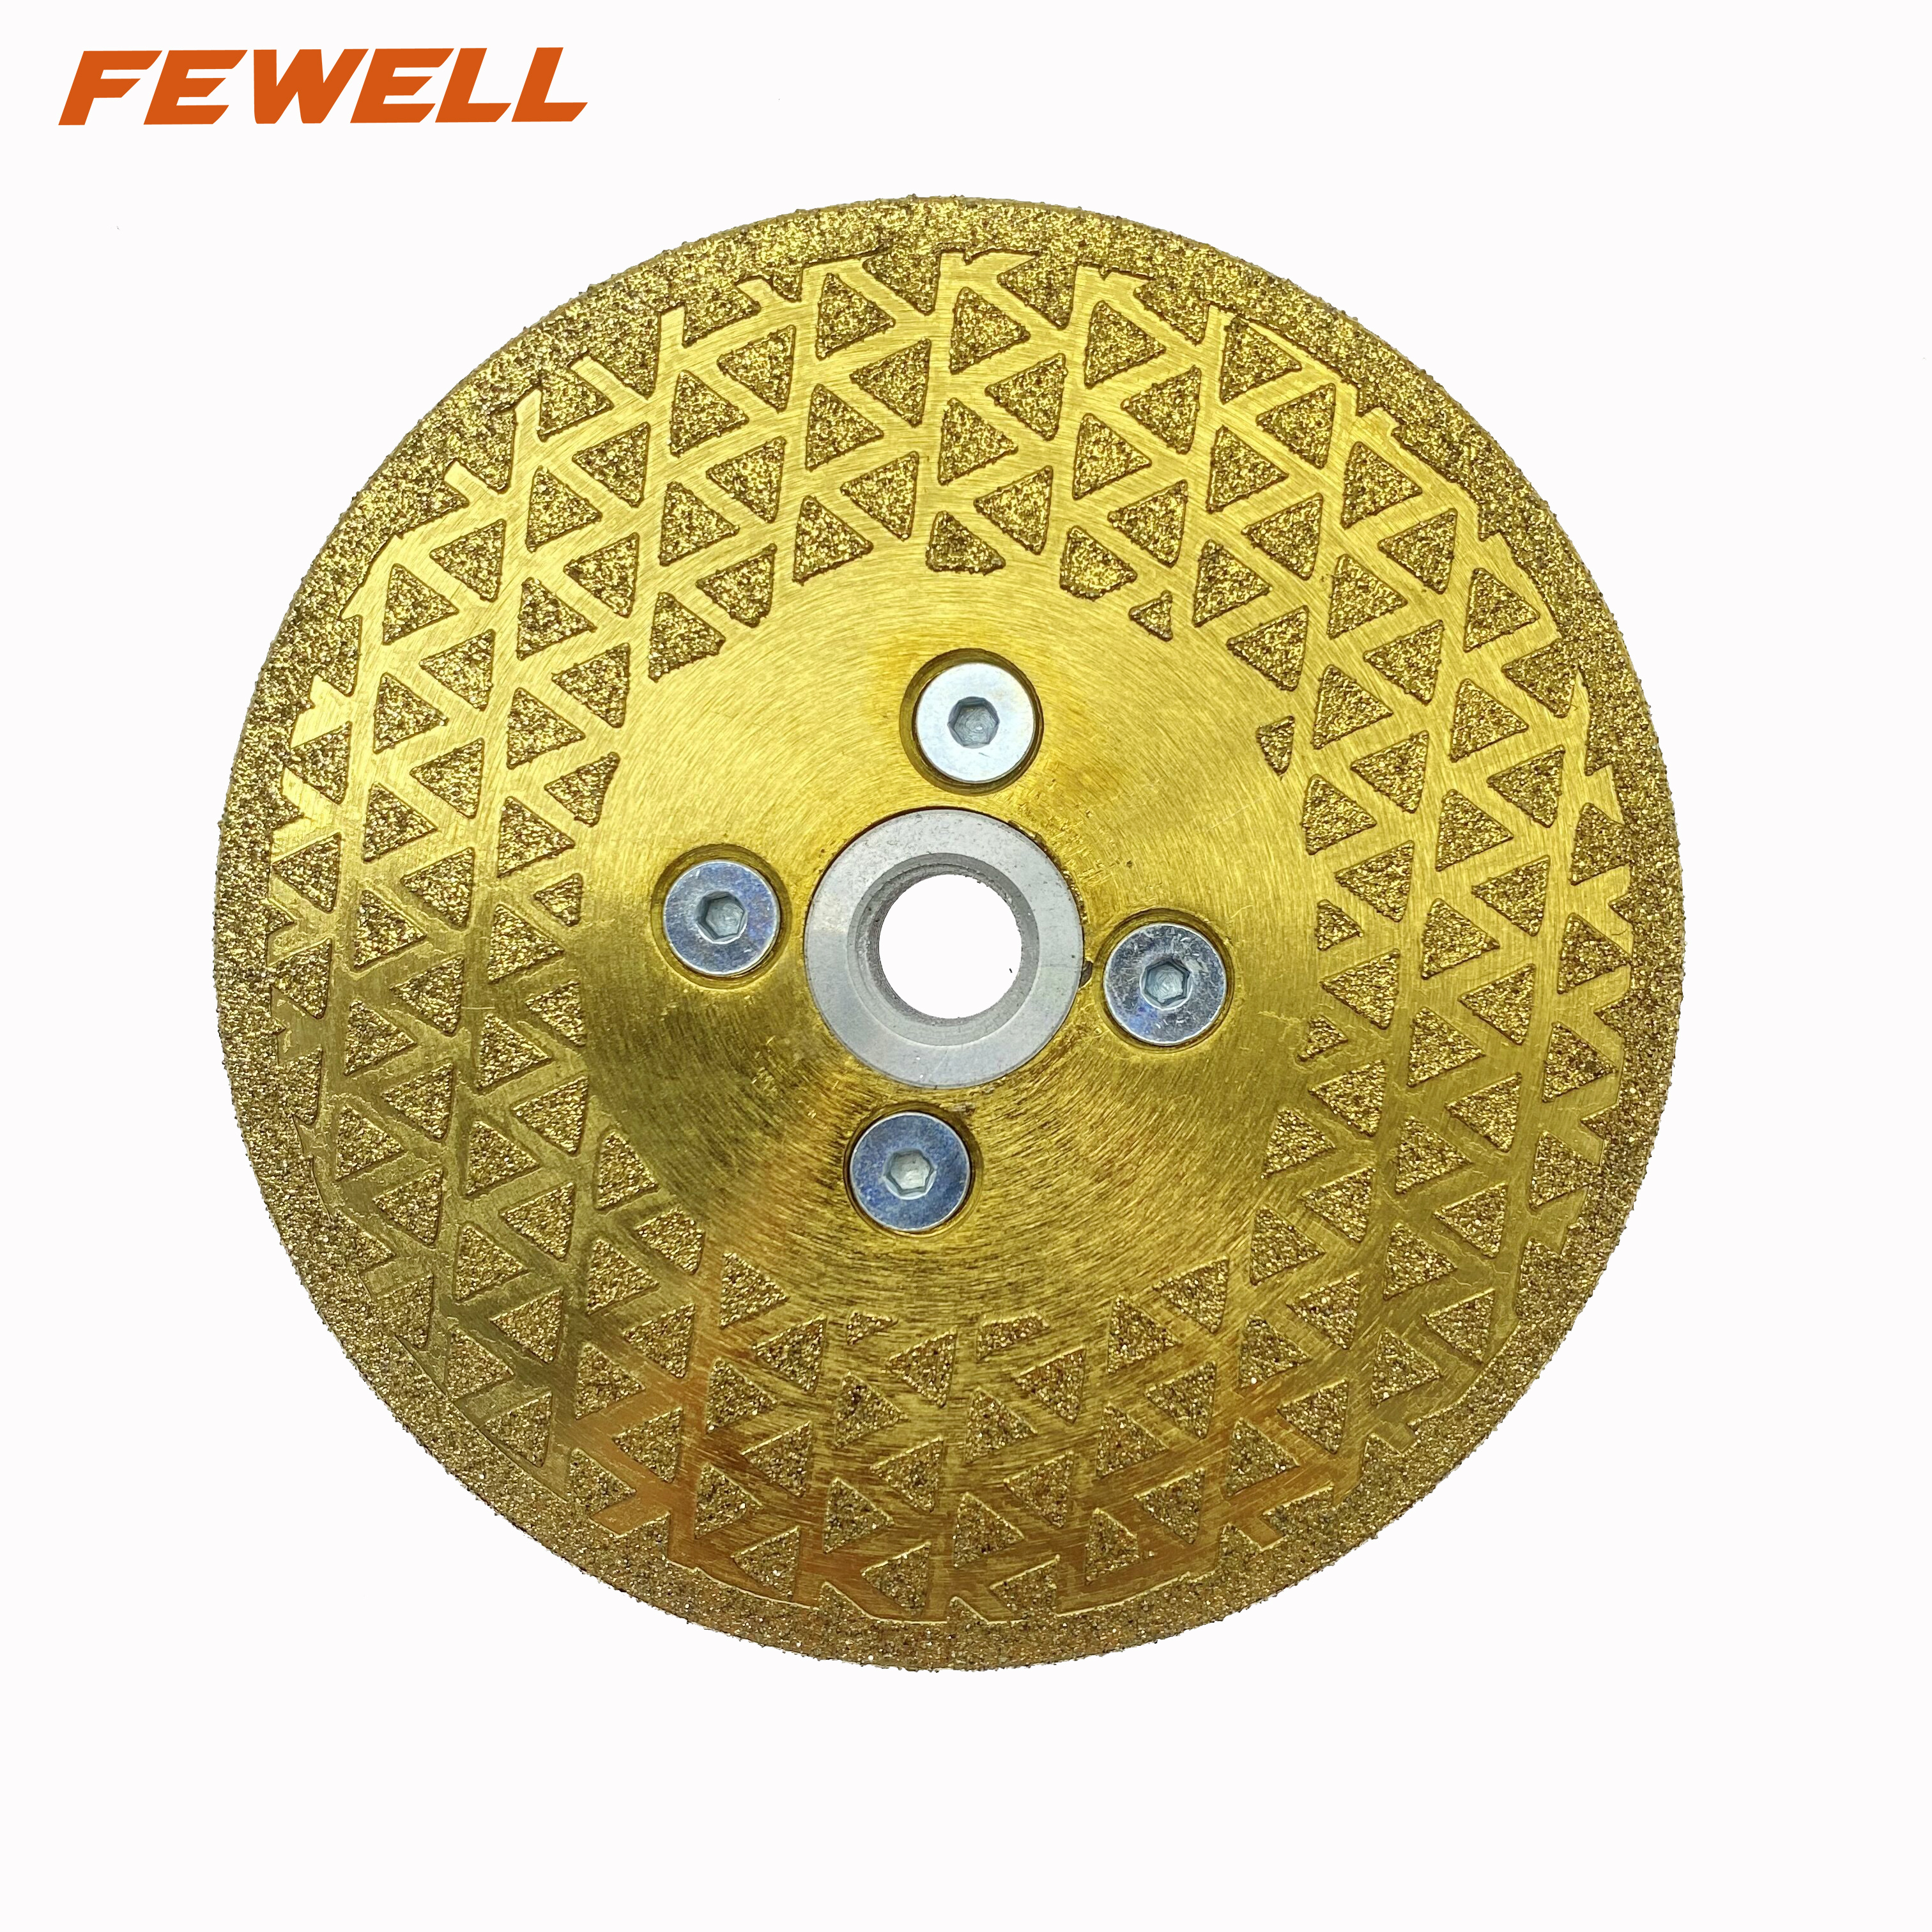 High quality 4.5-9inch 115-230mm M14 flange double side triangle shape blade electroplated diamond saw blade for marble